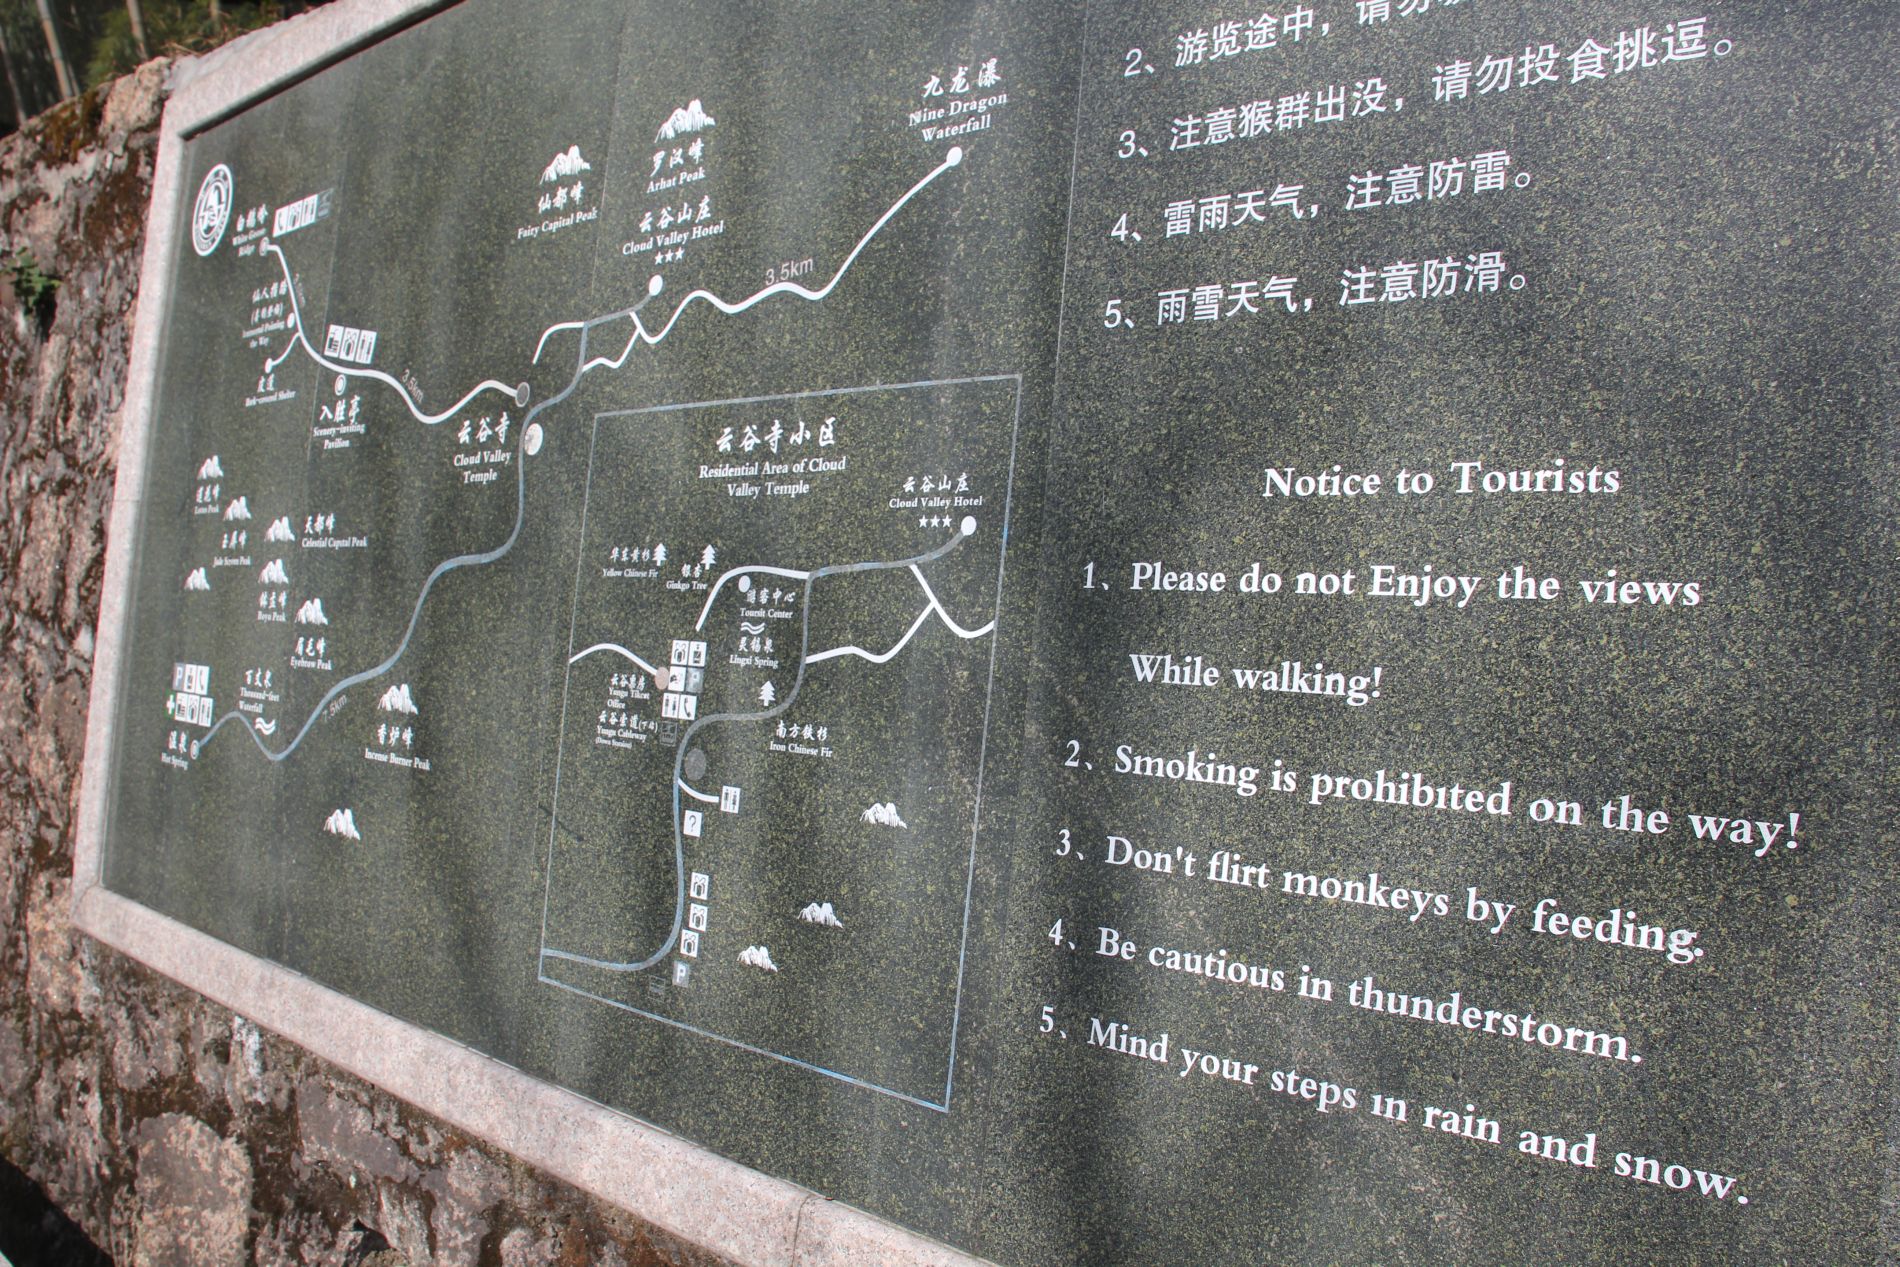 A sign warns Huangshan hikers to "not enjoy the views while walking."